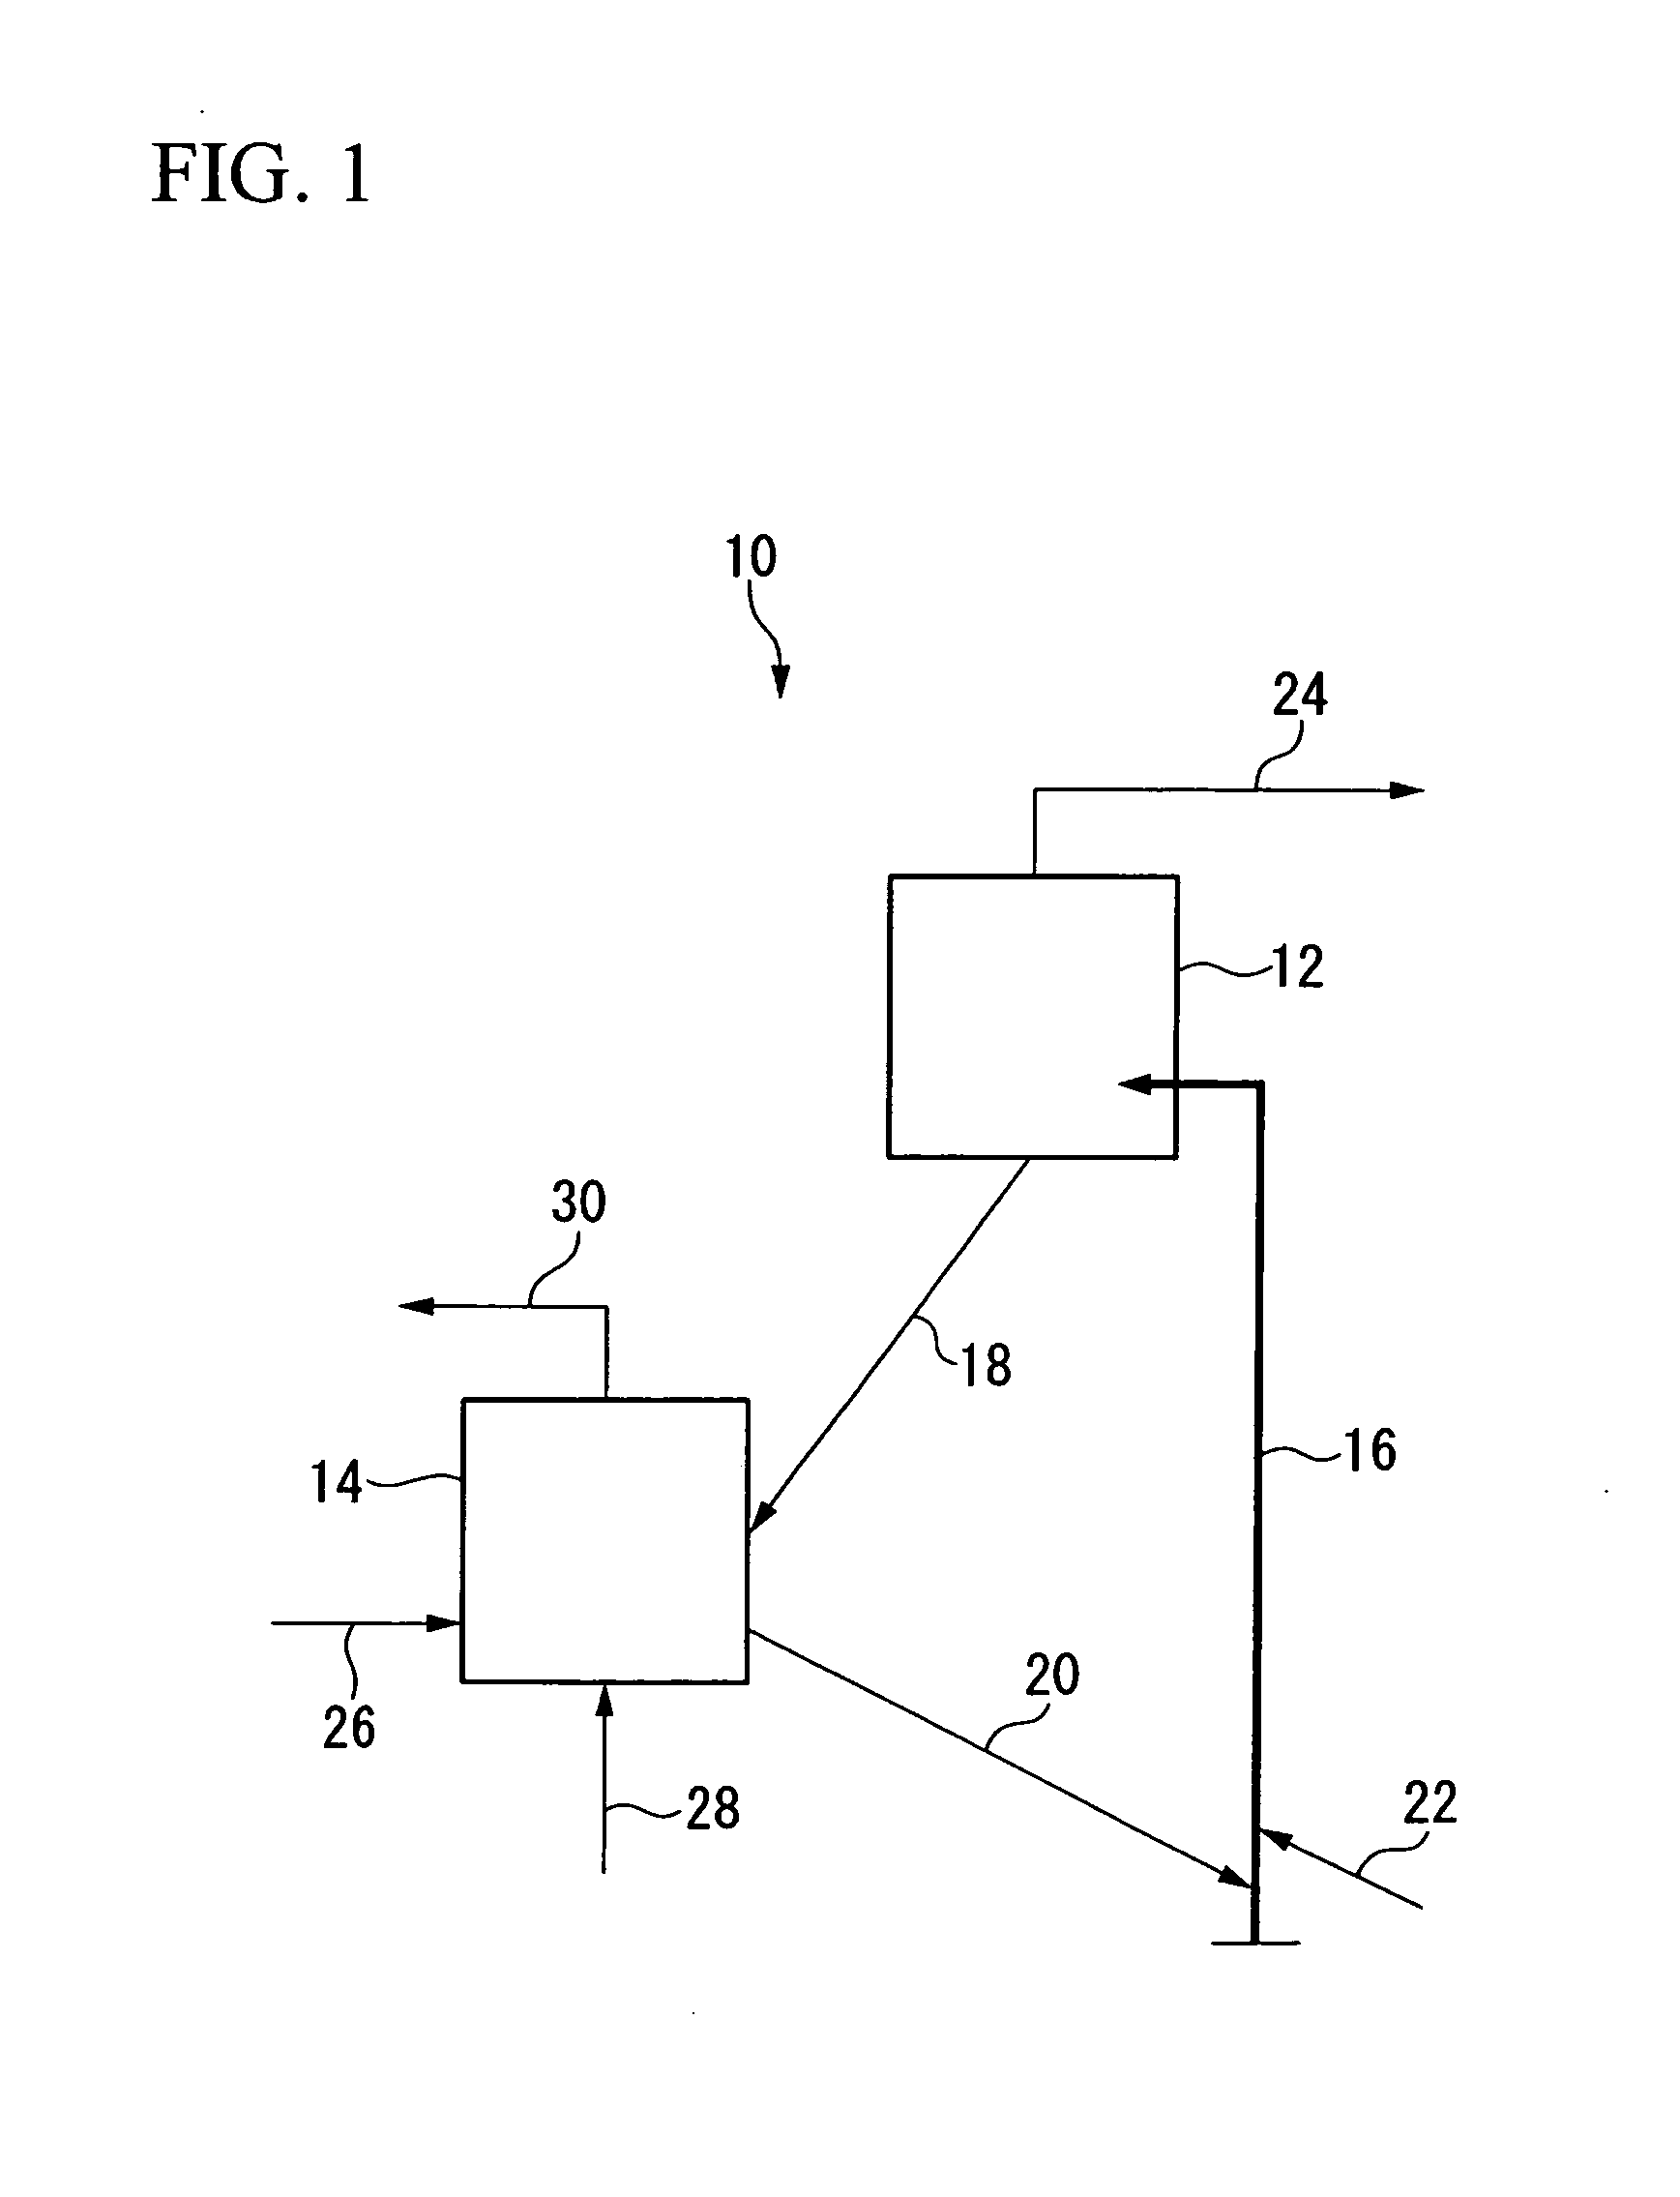 Method for producing aromatic hydrocarbons